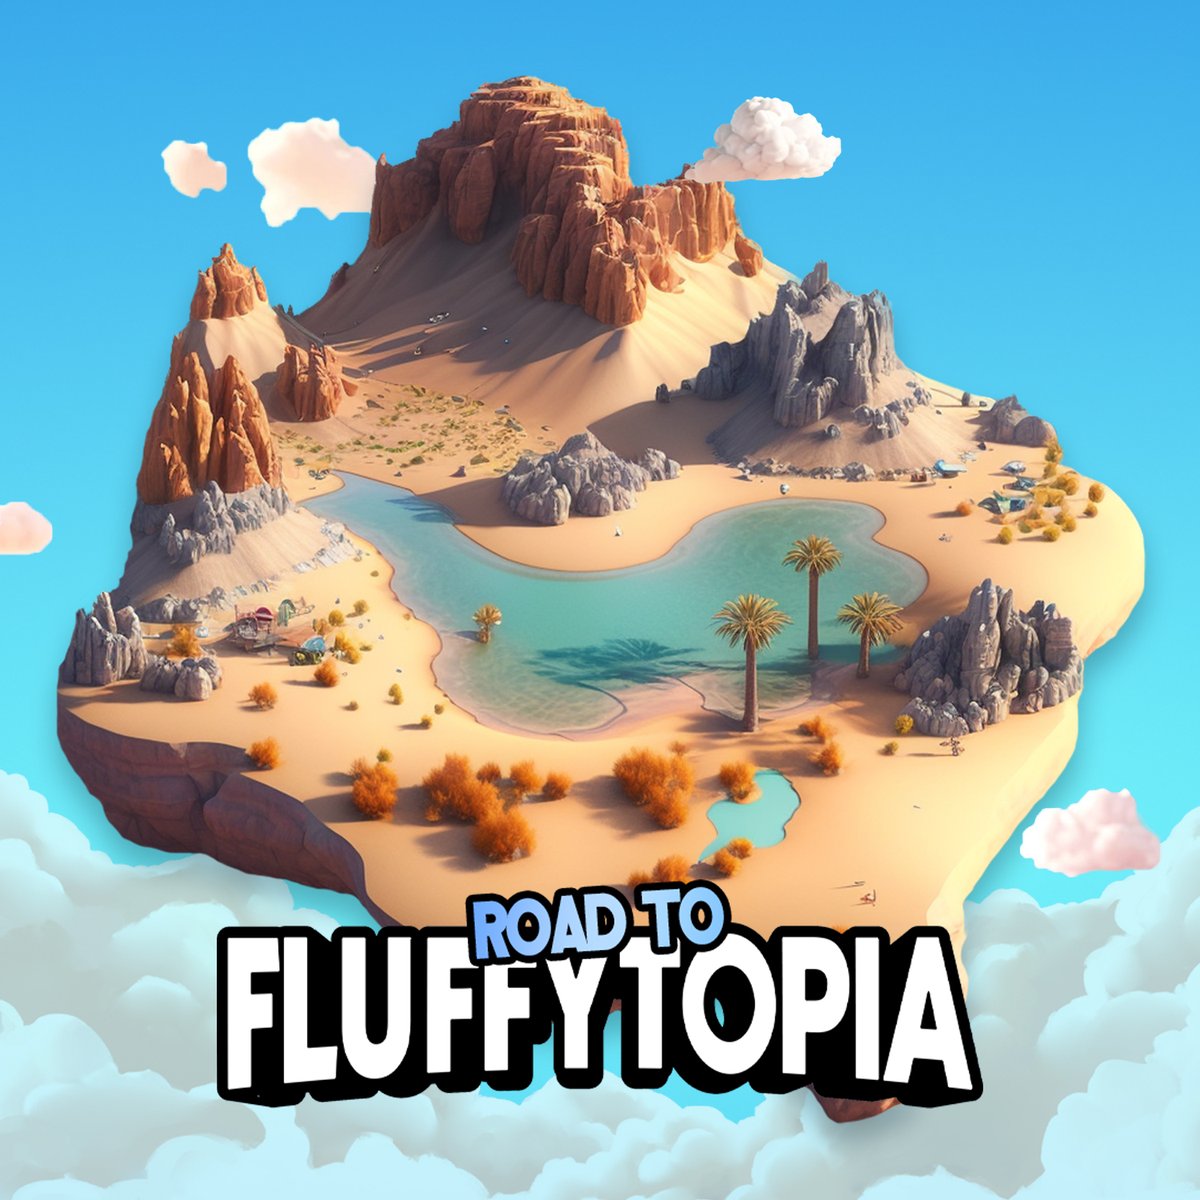 you’ve already heard about waflanda, but do you know 𝗳𝗹𝘂𝗳𝗳𝗶𝘀𝘁𝗮𝗻? 🏜️ this territory is a kinda gigantic desert located west of fluffytopia a no man's land, just like your local walmart during the super bowl, where few explorers dare to venture (fluffin wimps 😮‍💨)